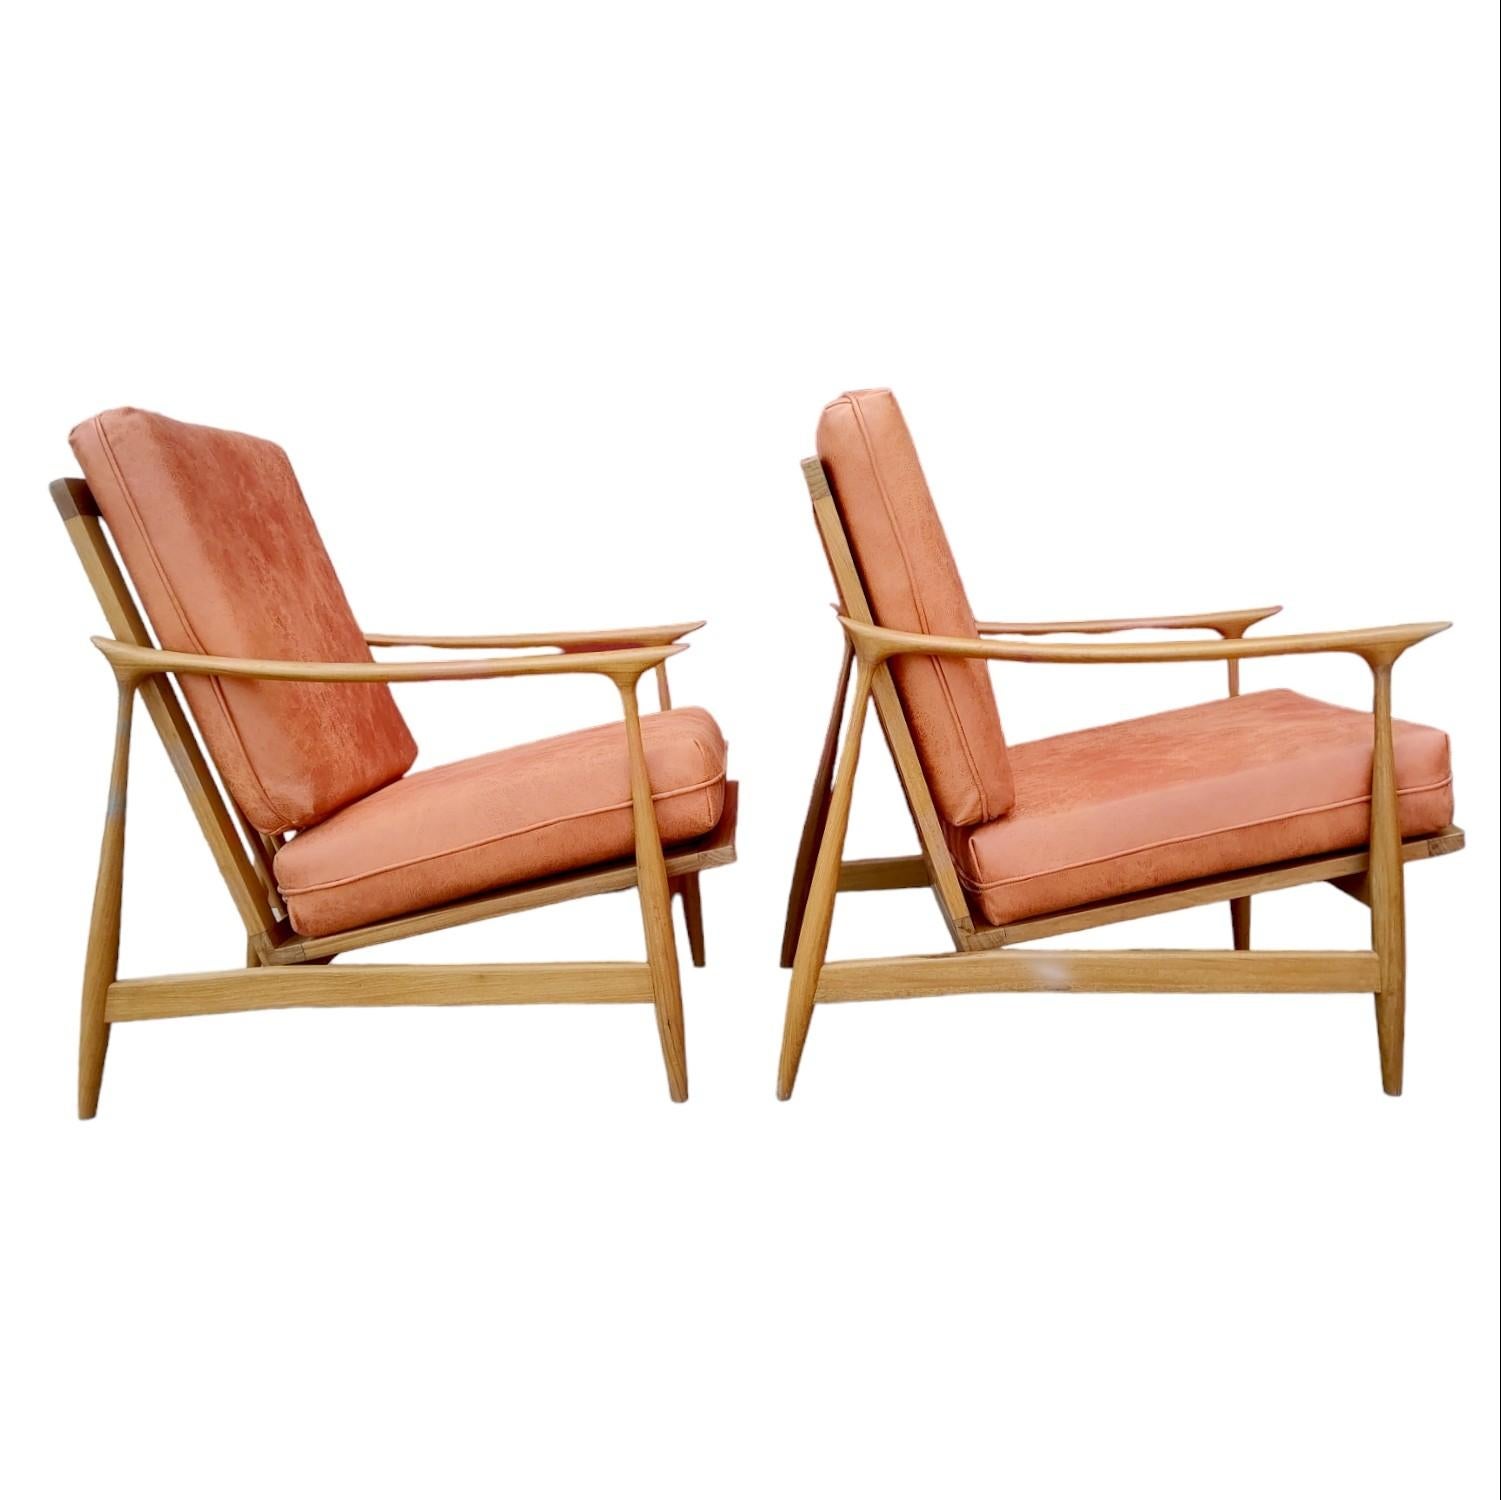 Upholstery Pair of Mid-Century Modern Danish Style Arm Chairs